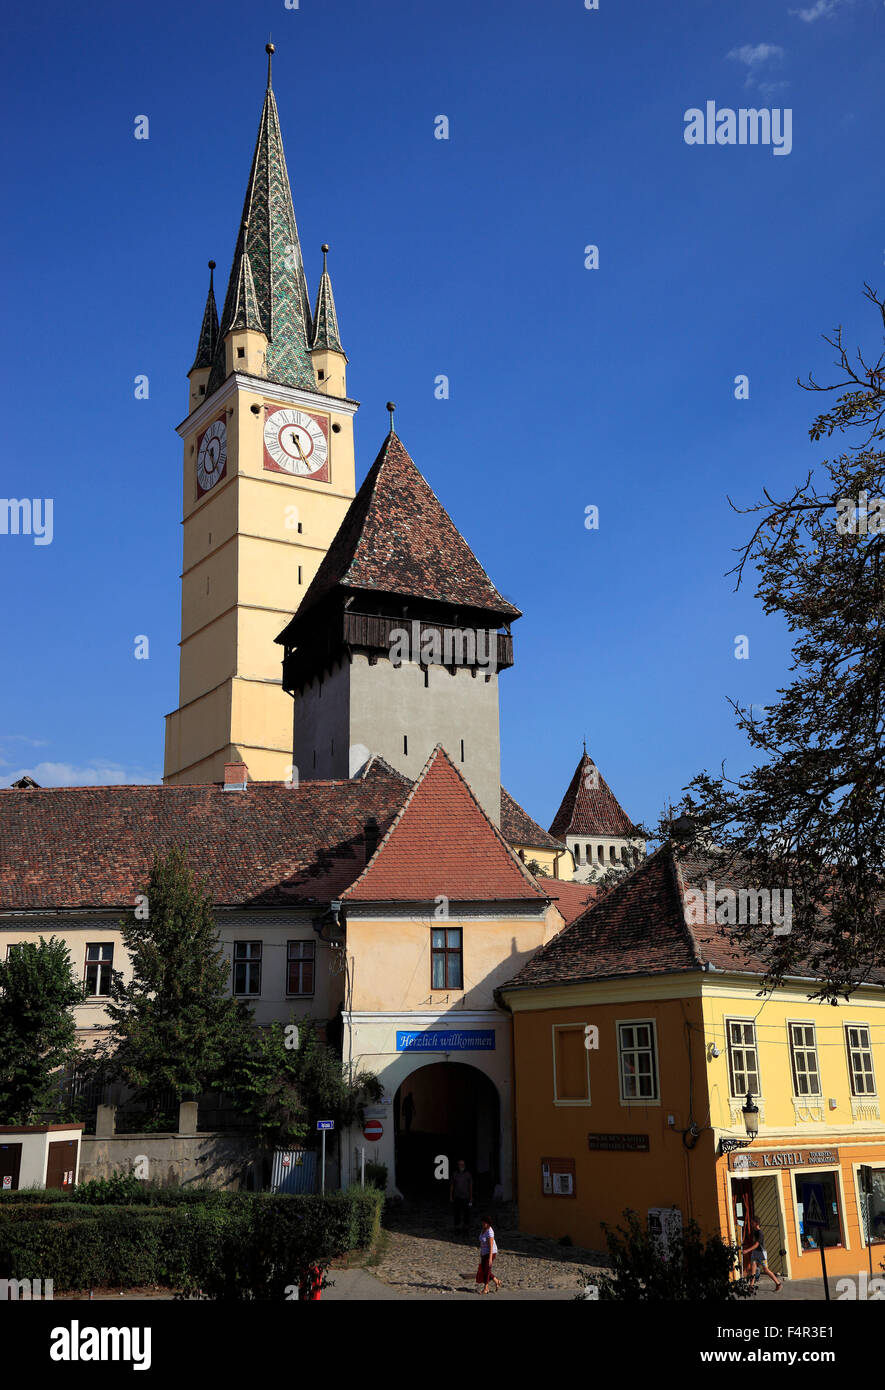 Medias is a town in Transylvania County in Sibiu, Romania, The Mariaret Church, which is known for its Leaning Tower. Today, thi Stock Photo